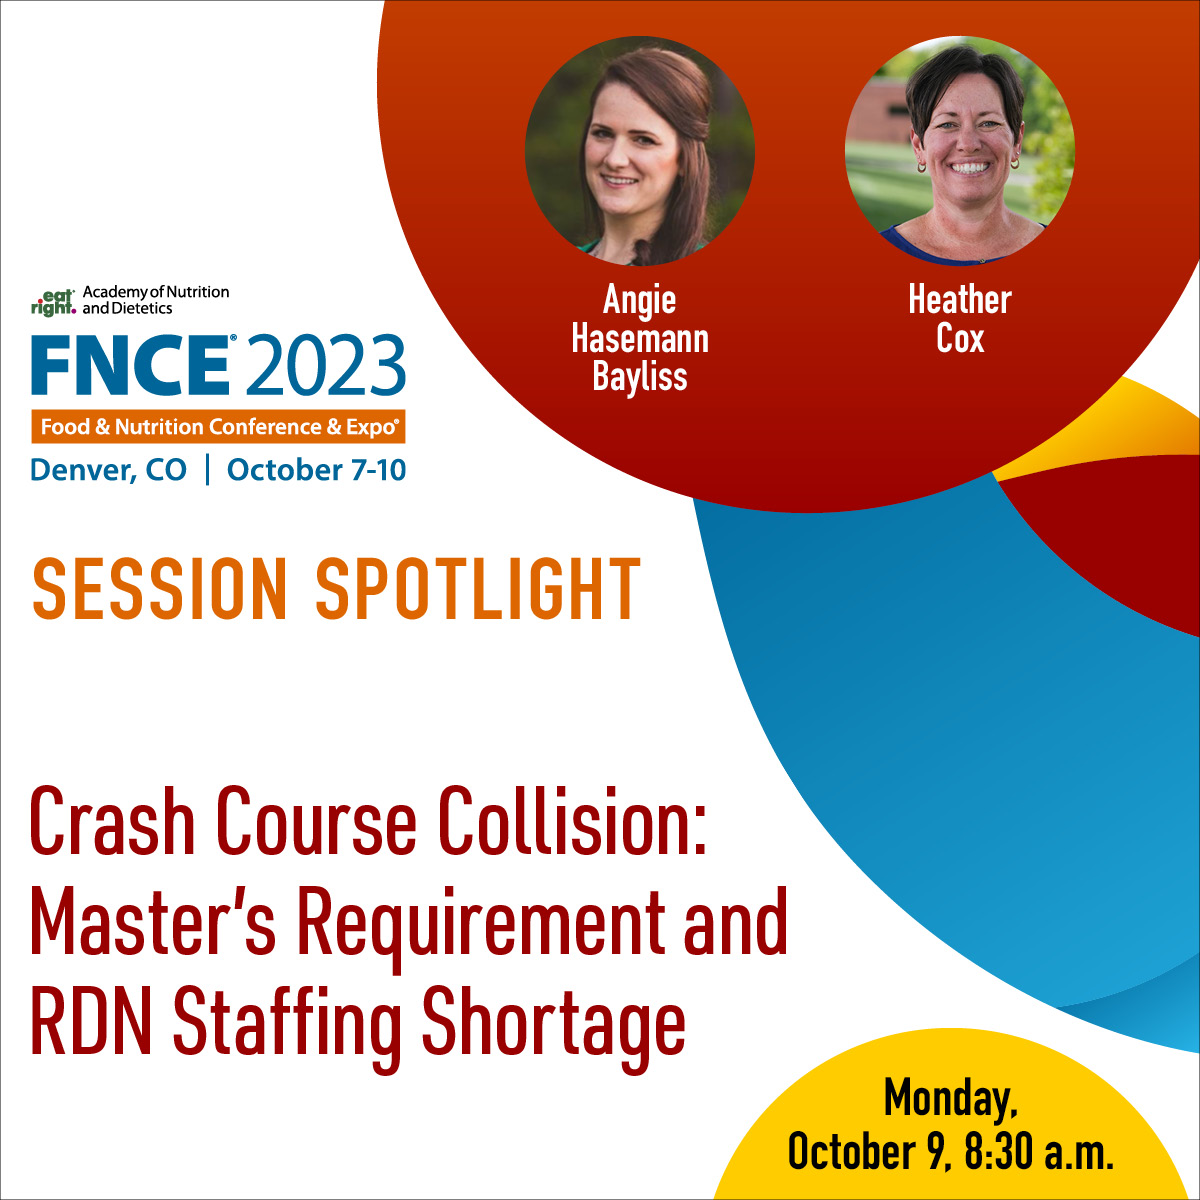 Navigate the complex intersection of the RDN graduate degree requirements and staffing shortages with #FNCE speakers Heather Cox, MS, RDN, Angie Hasemann Bayliss, MS, RDN, and moderator Wendy Phillips, MS, RD, LD, FAND, FASPEN (@Nutrition4ADHD).

Details: sm.eatright.org/FNCEmasters